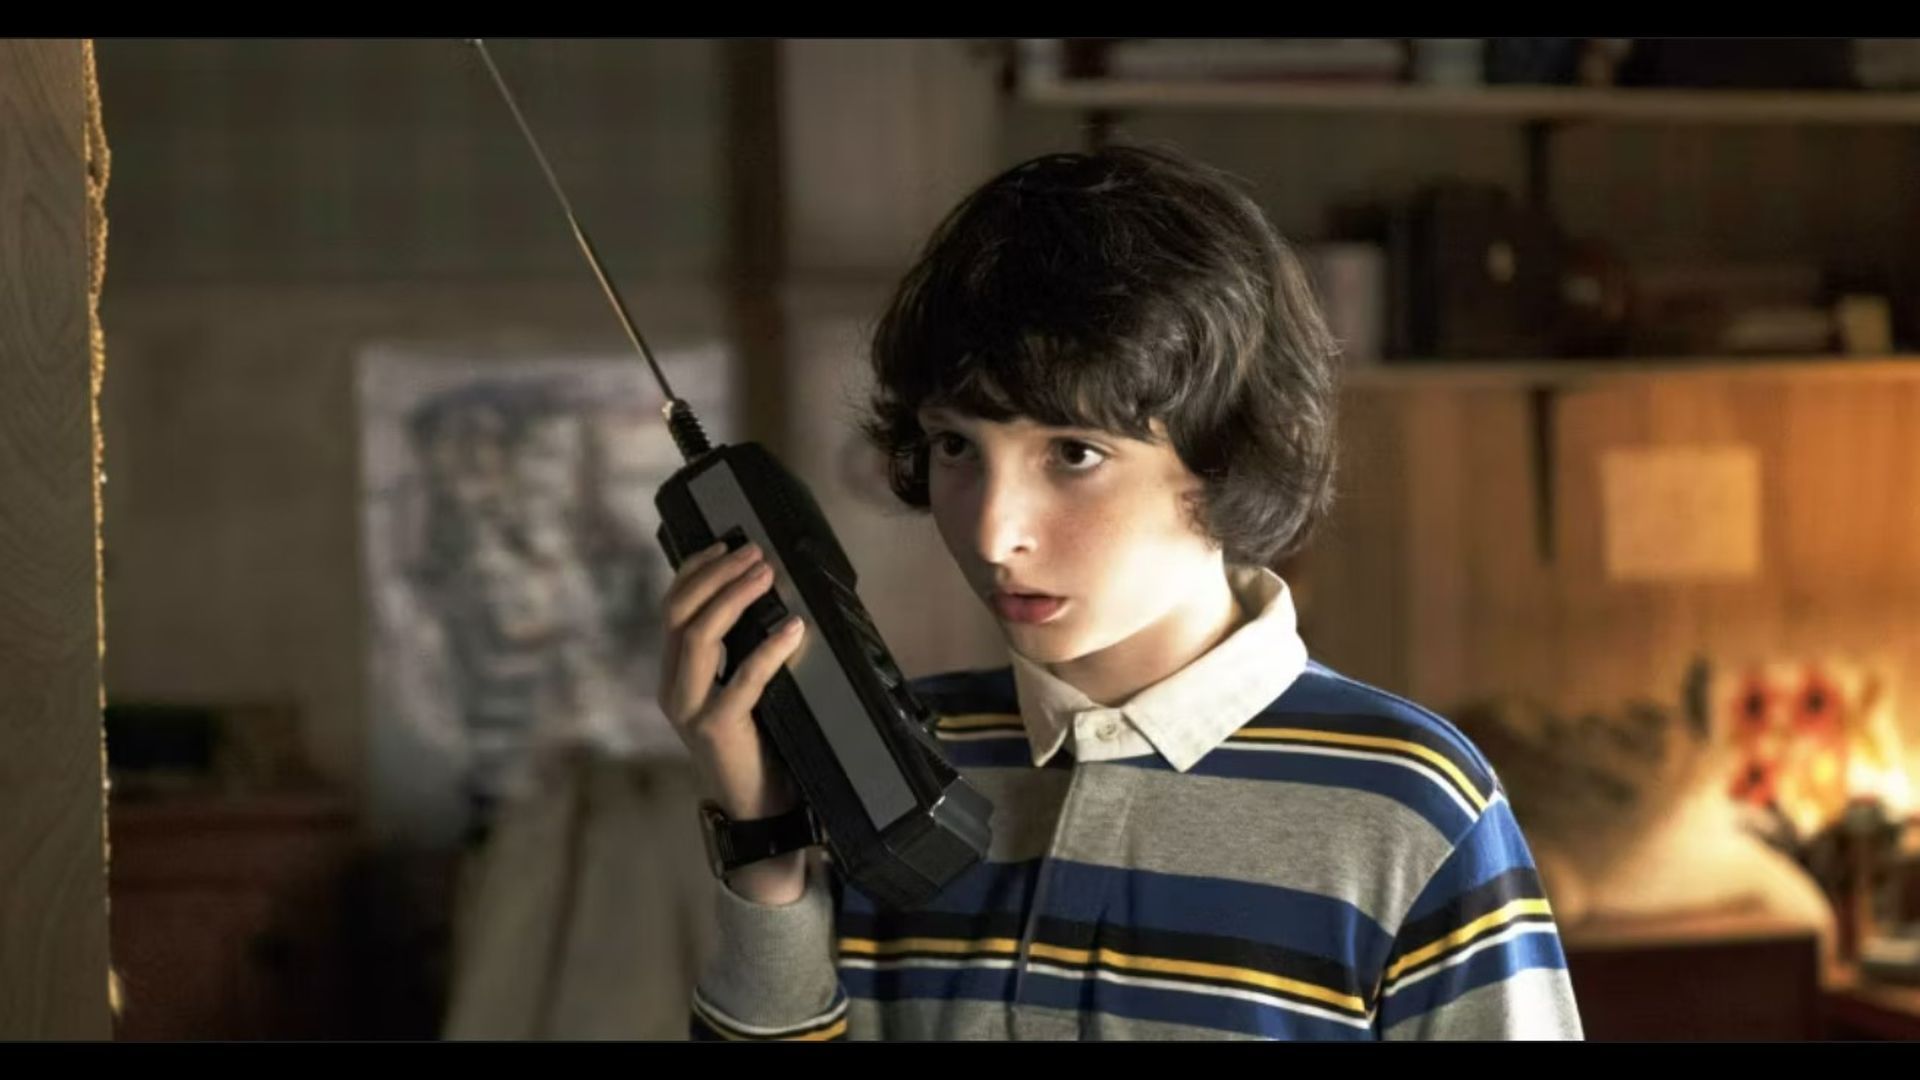 Walkie-talkies are pieces of 80s tech that are present in every season of Stranger Things. Sometimes the giant Realistic TRC-series radios---introduced by RadioShack in 1985---help the kids communicate across their houses.